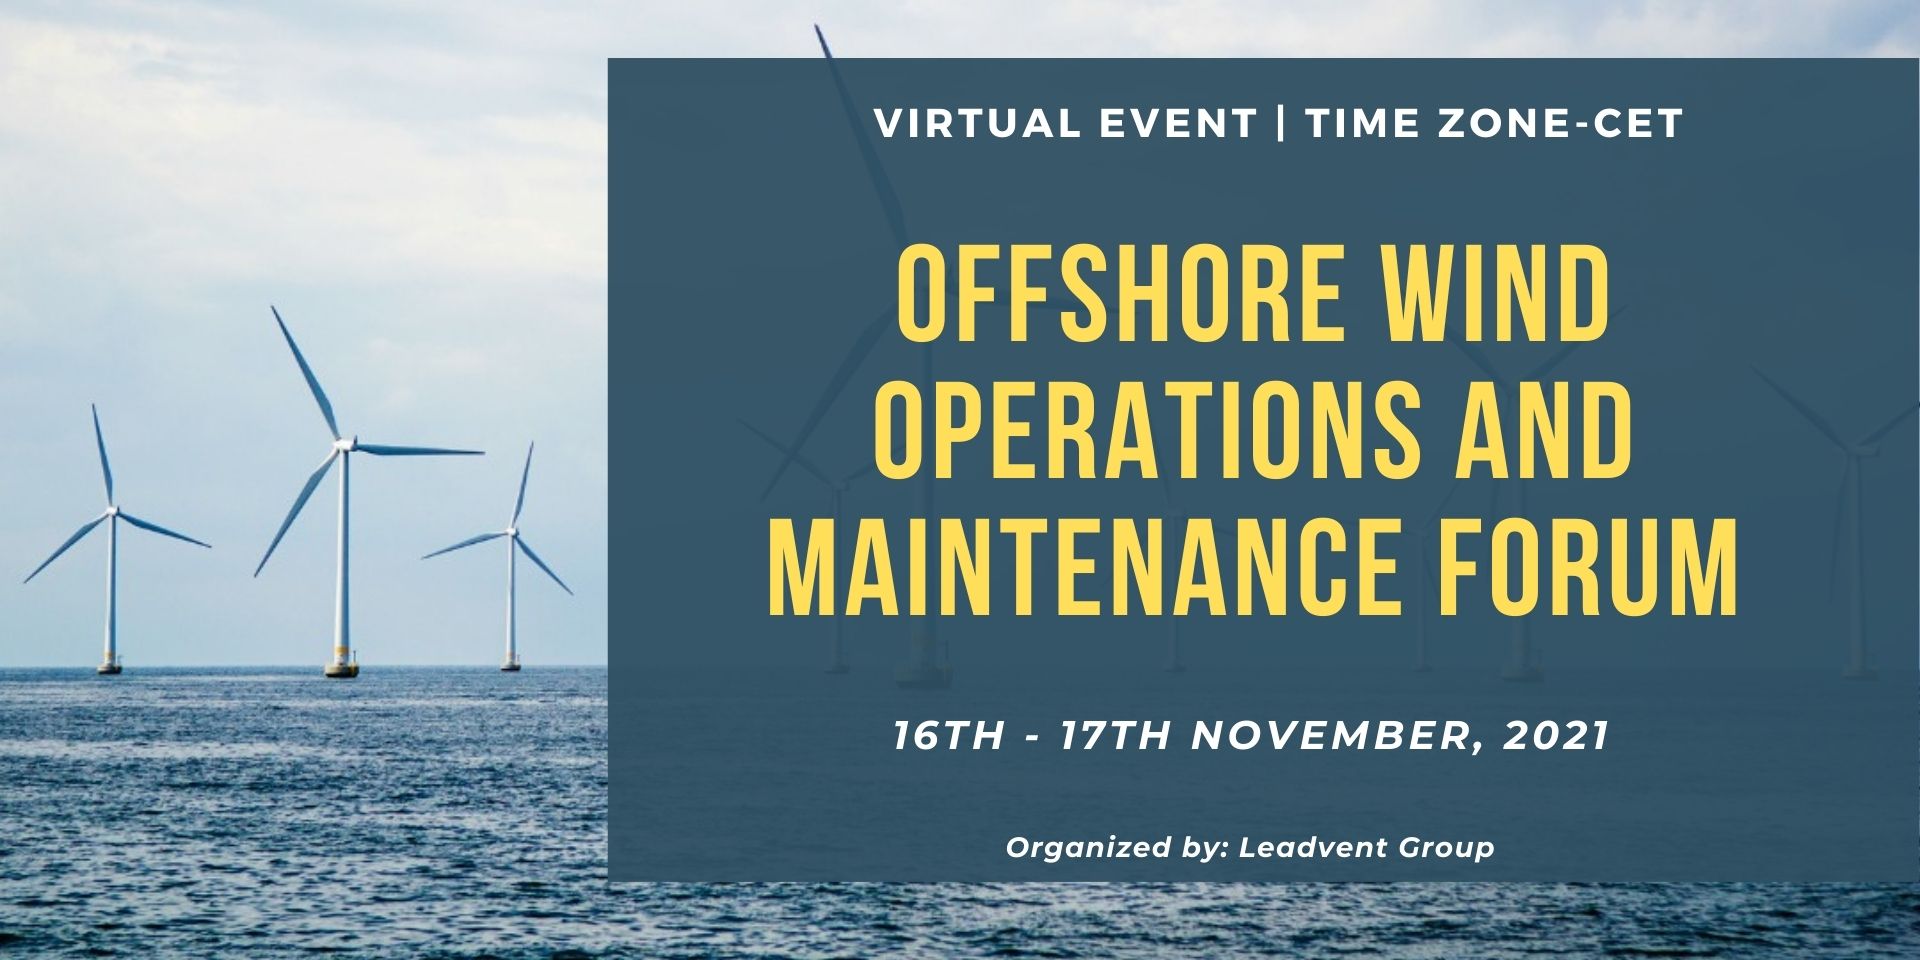 Offshore Wind Operations and Maintenance Forum organized by Leadvent Group